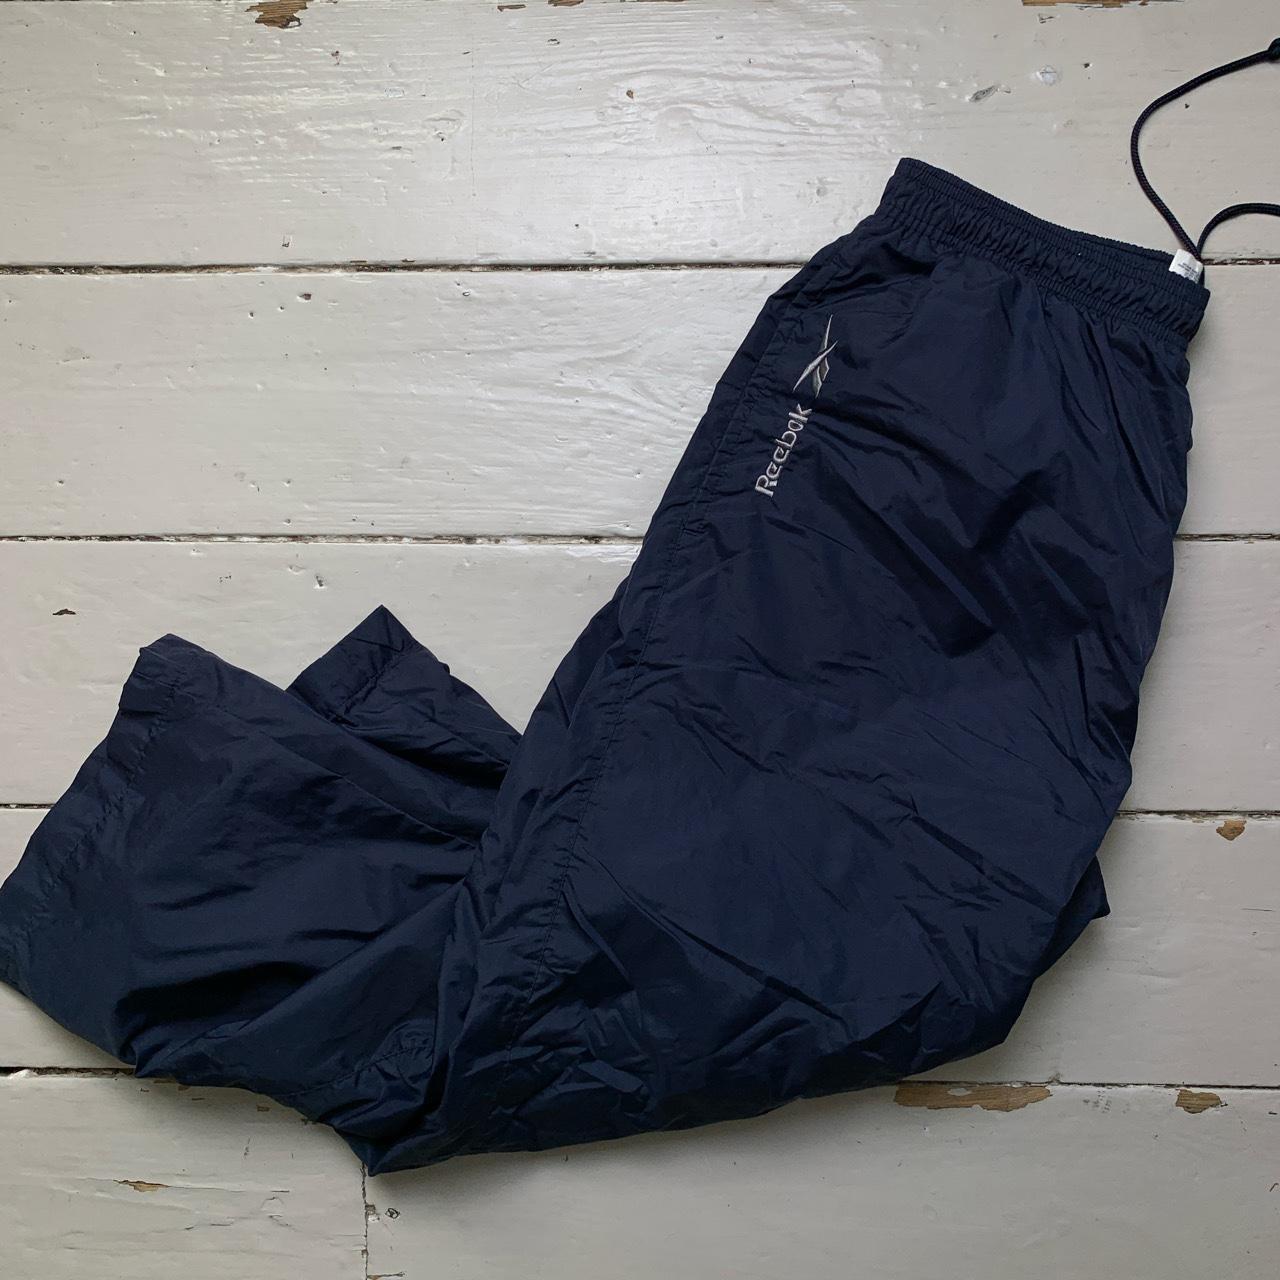 Reebok Navy and White Shell Trackpant Baggy Shorts